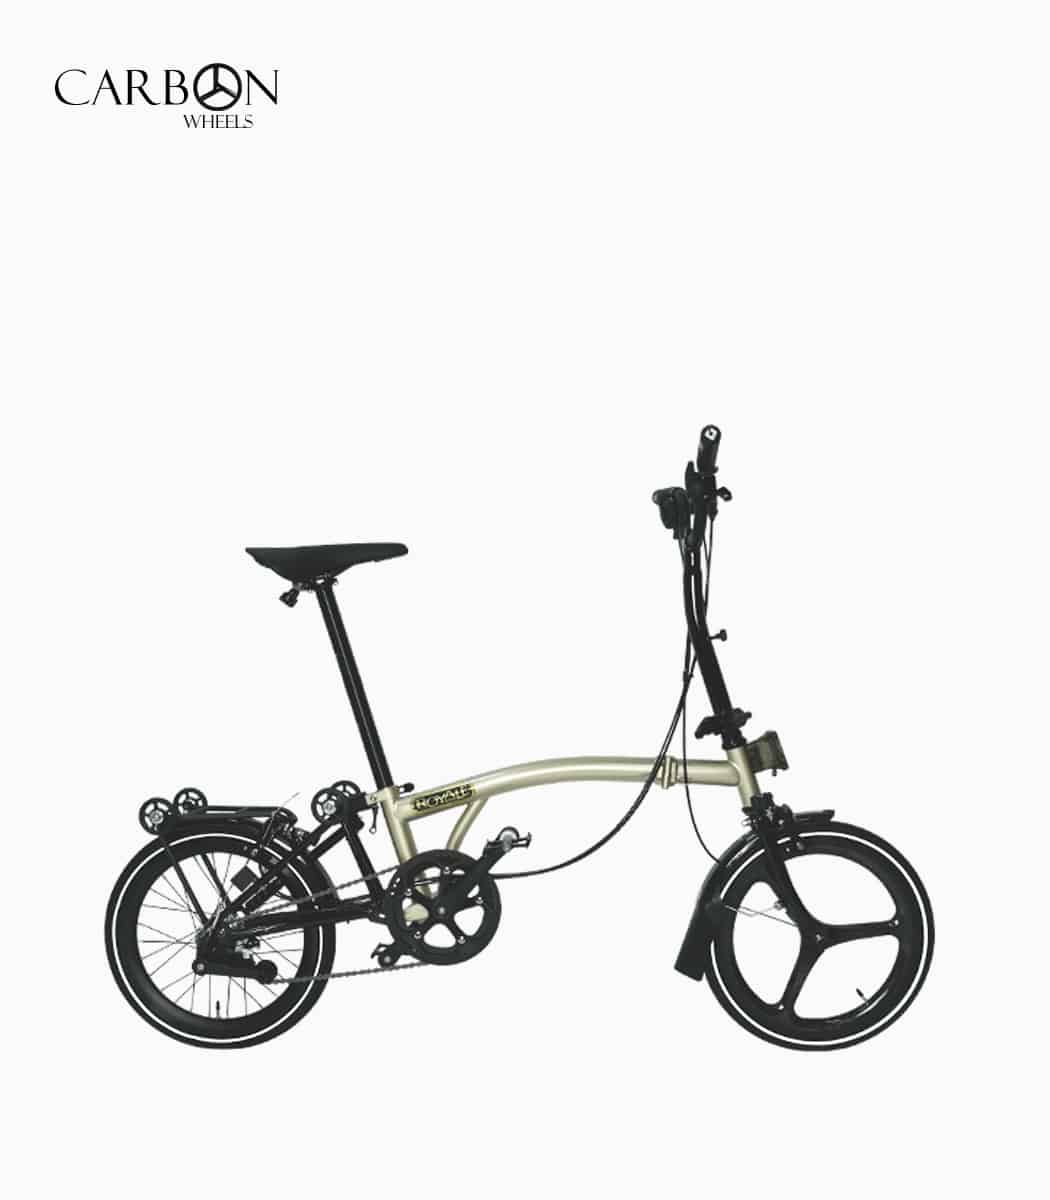 ROYALE Carbon M6 (CHAMPAGNE) foldable bicycle right